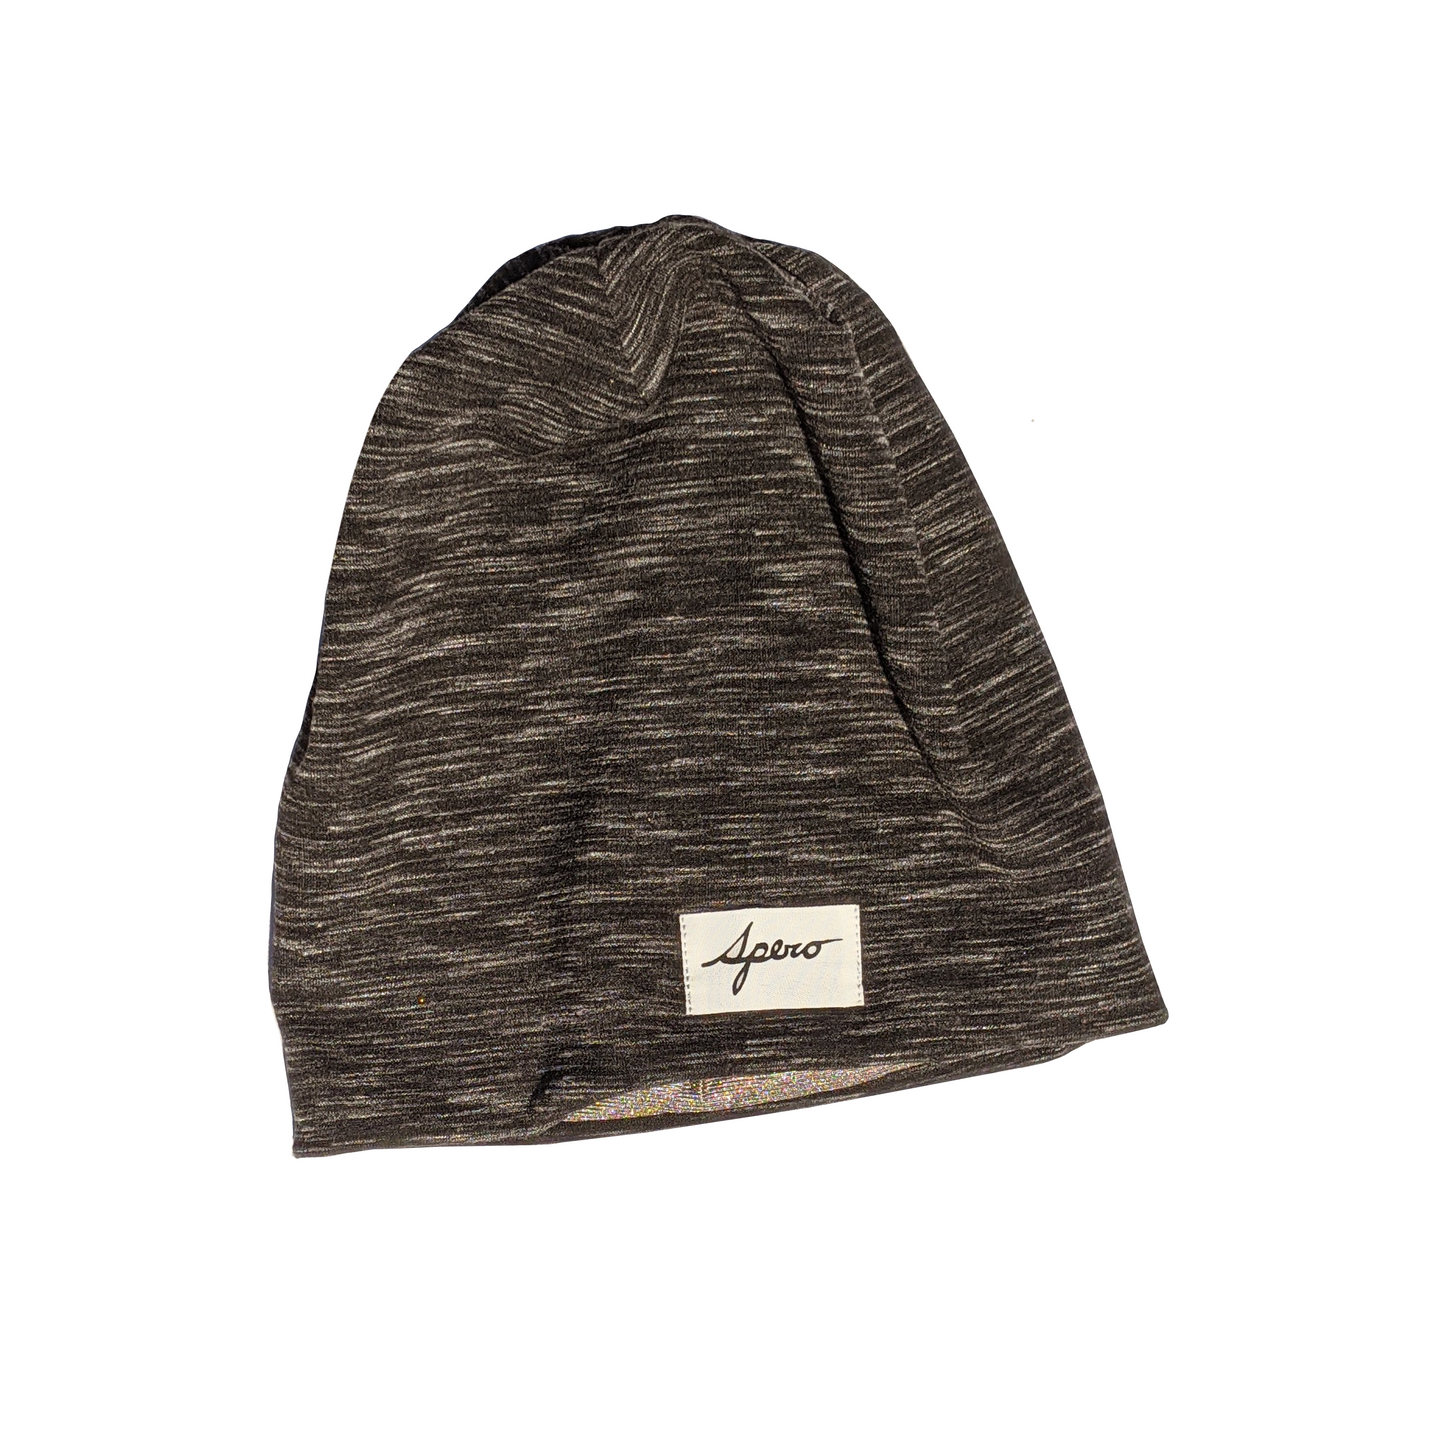 EMF Protective Slouchy Beanies